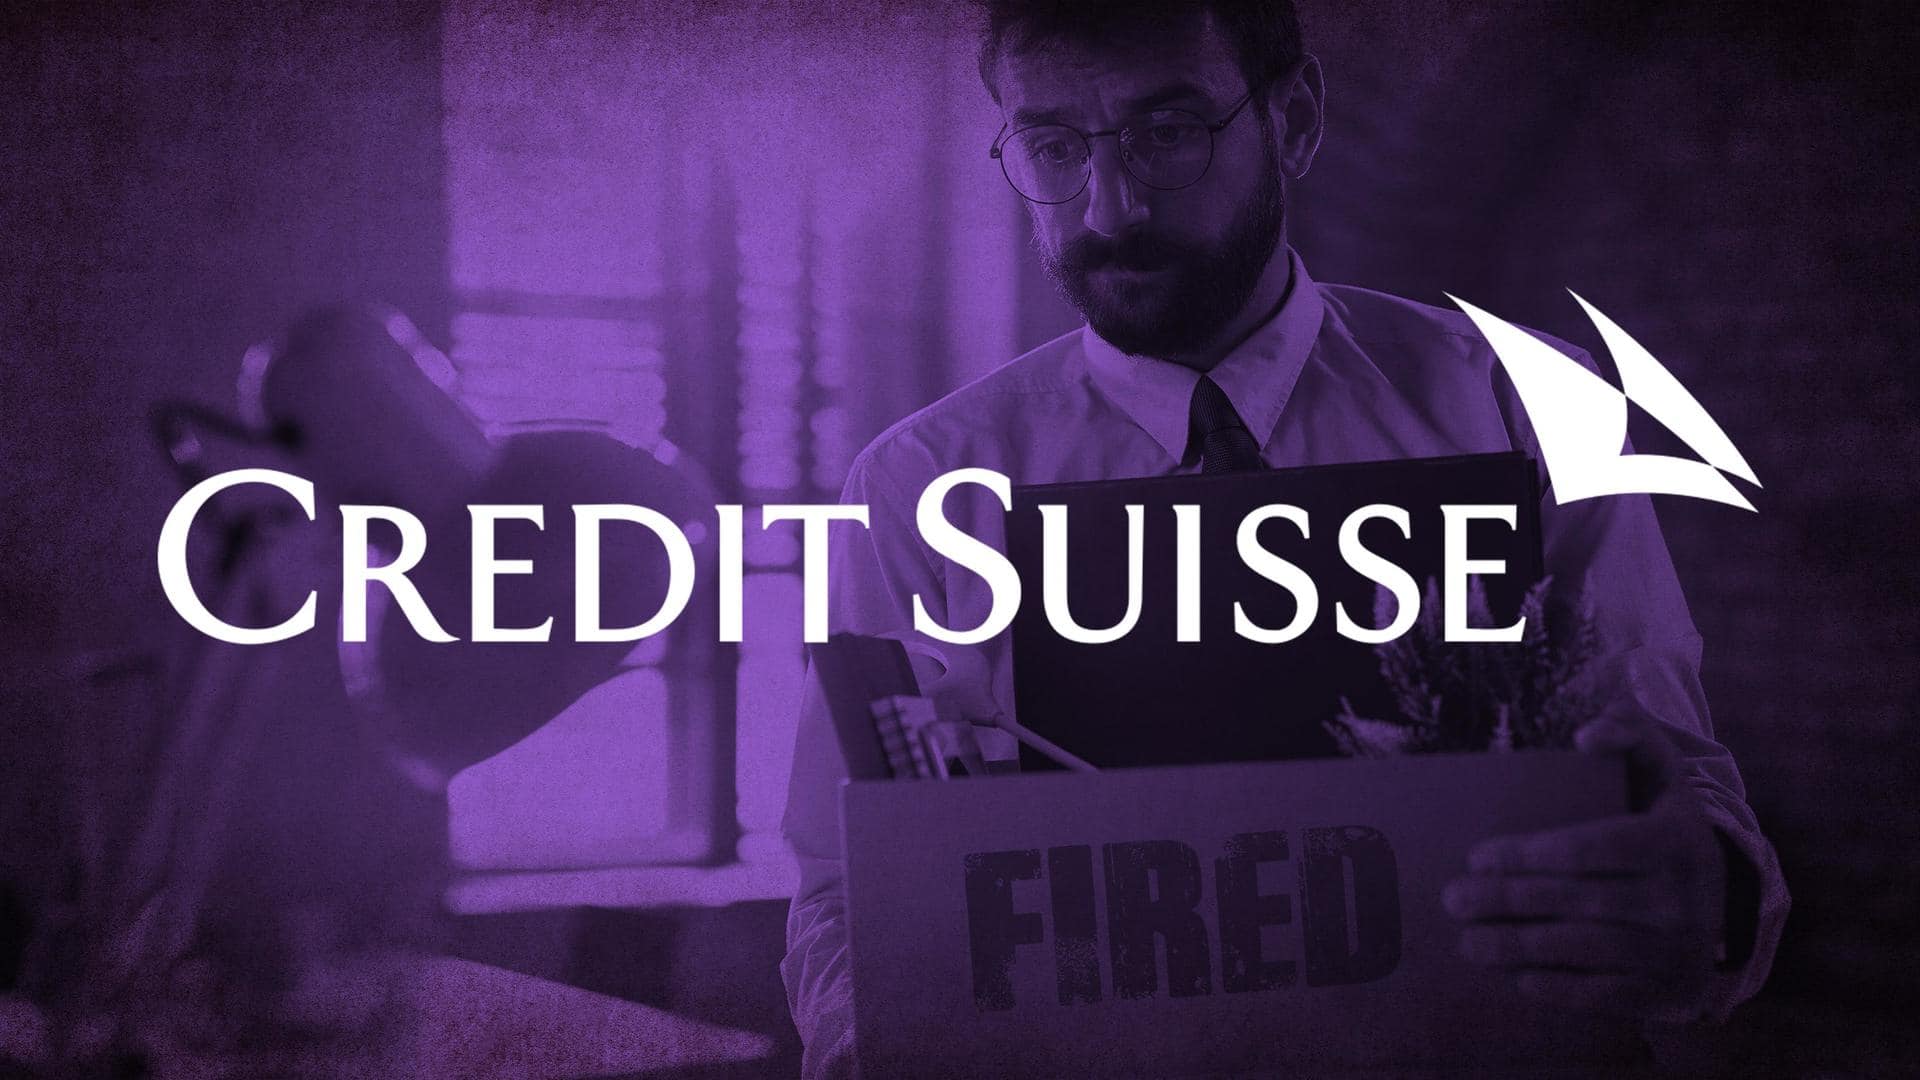 Credit Suisse to layoff 9,000 people, projects $1.6bn Q4 loss